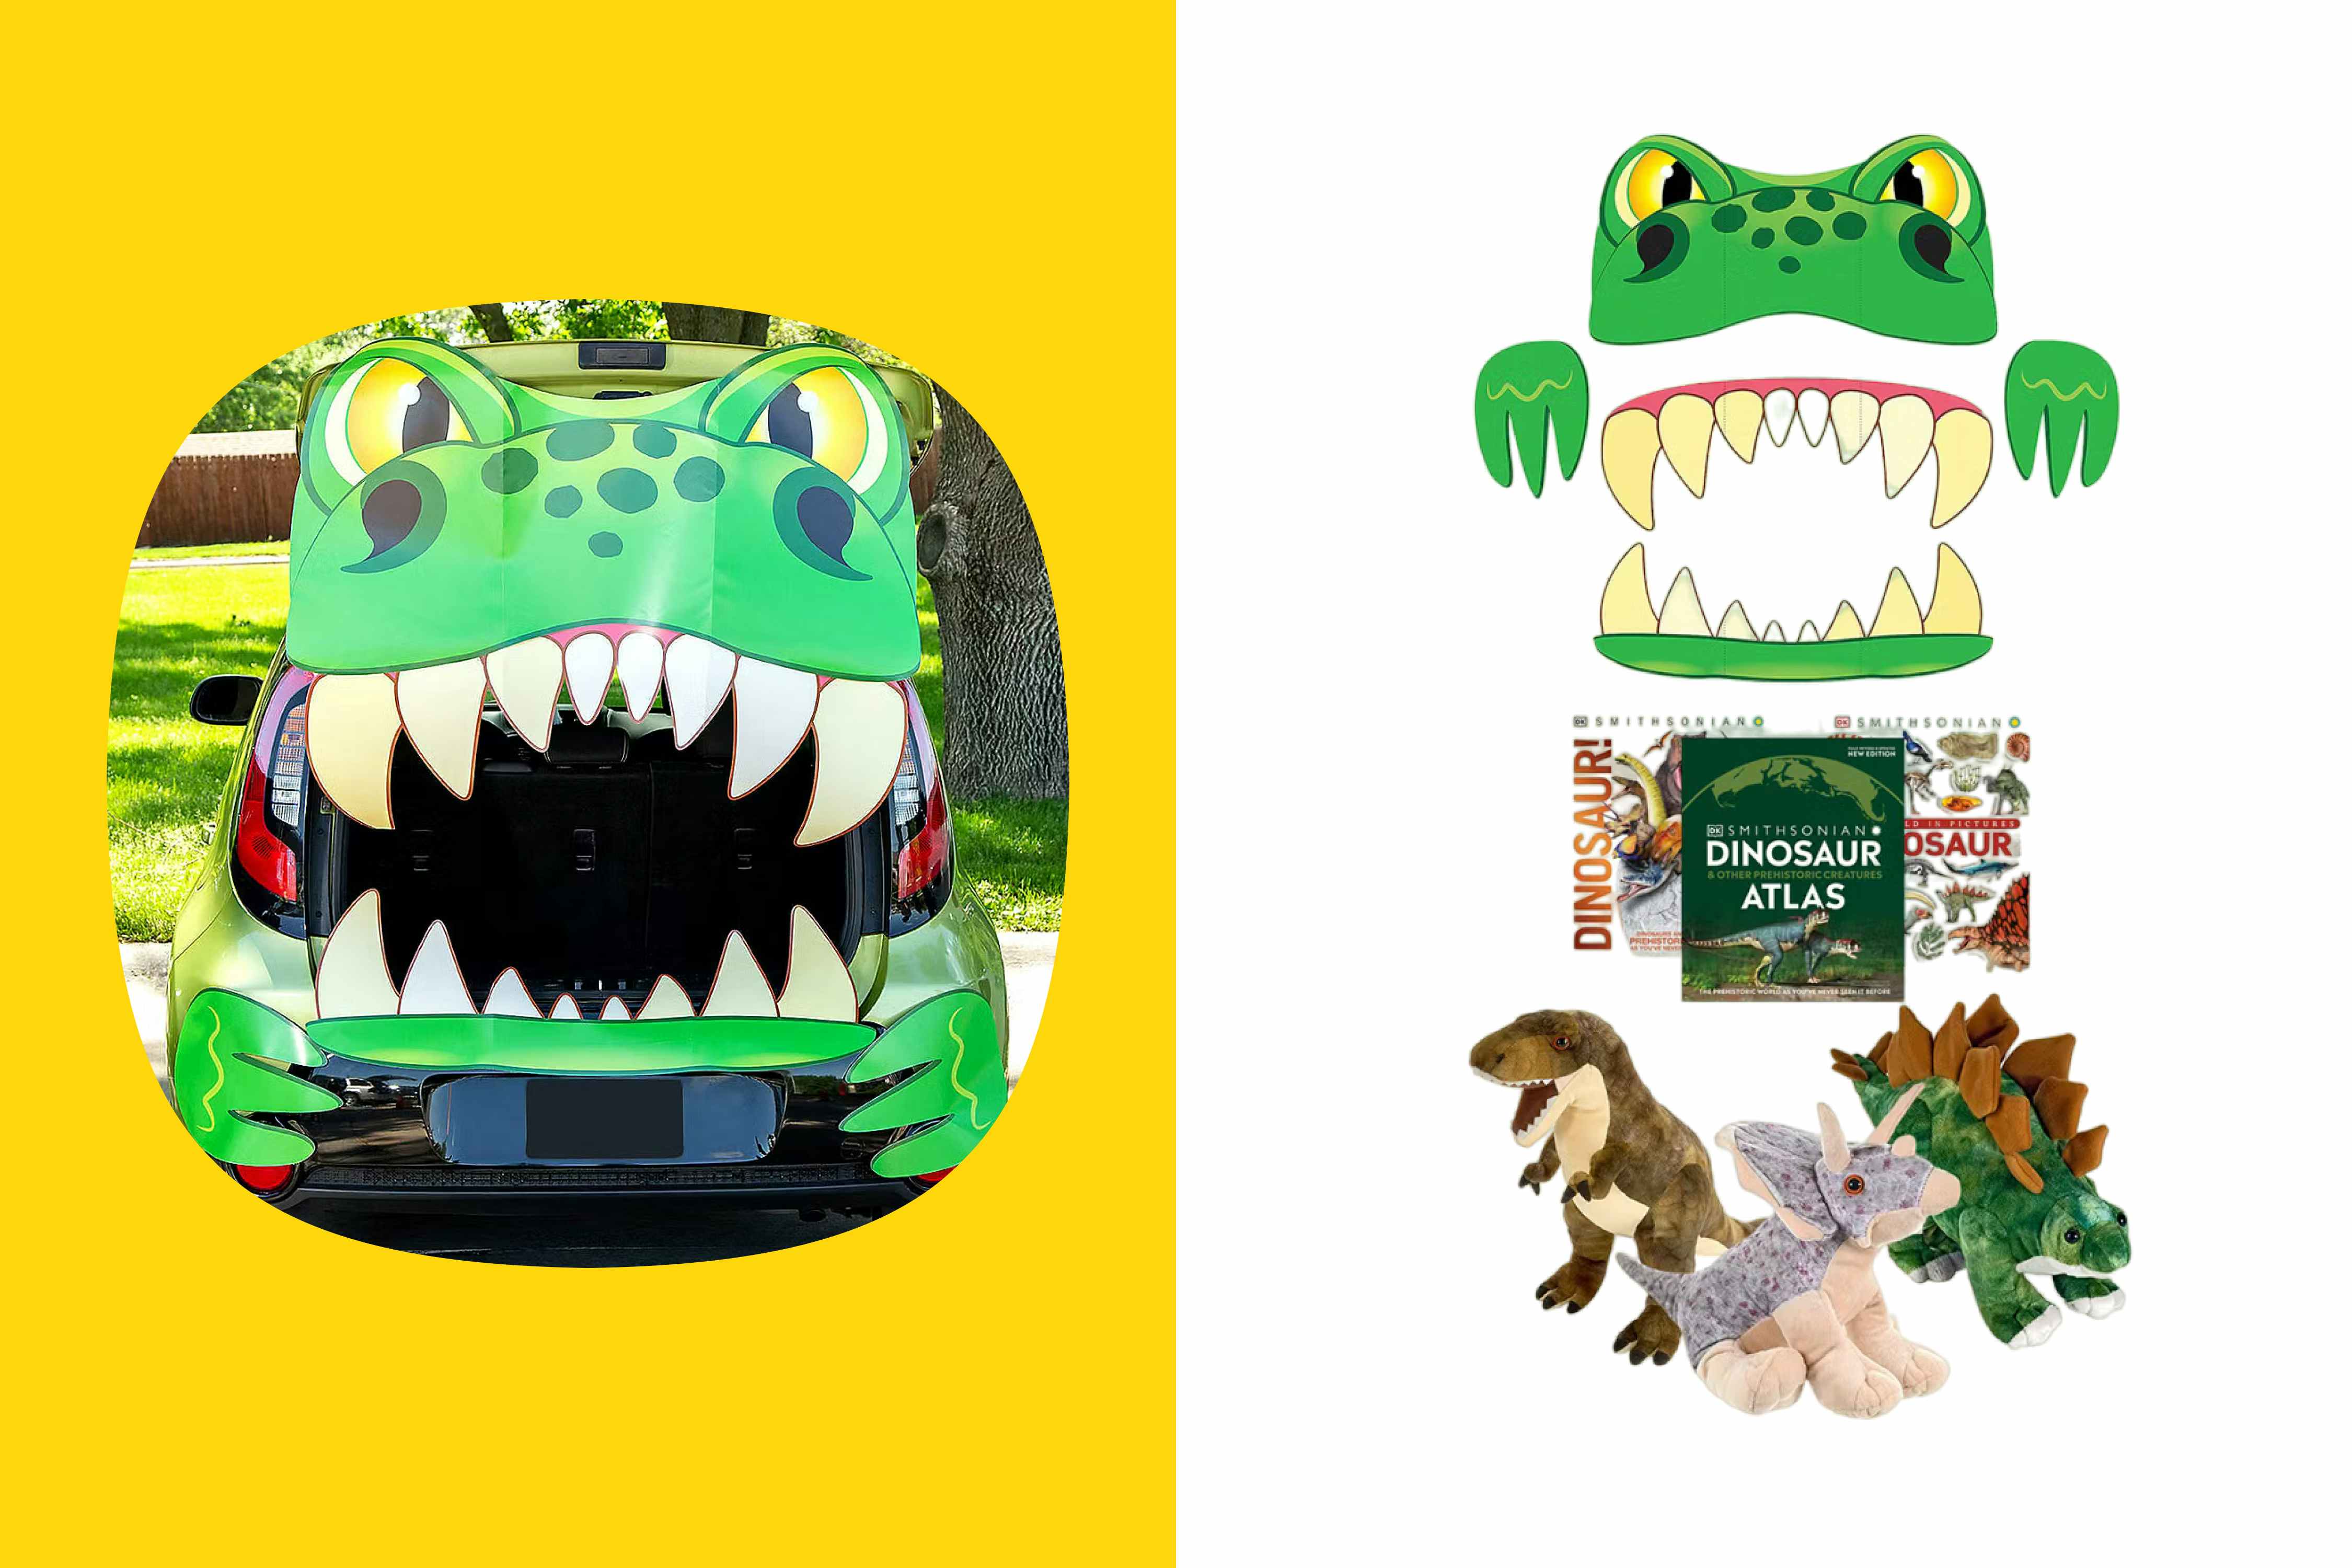 a trunk or treat idea with an Dinosaur theme and supplies